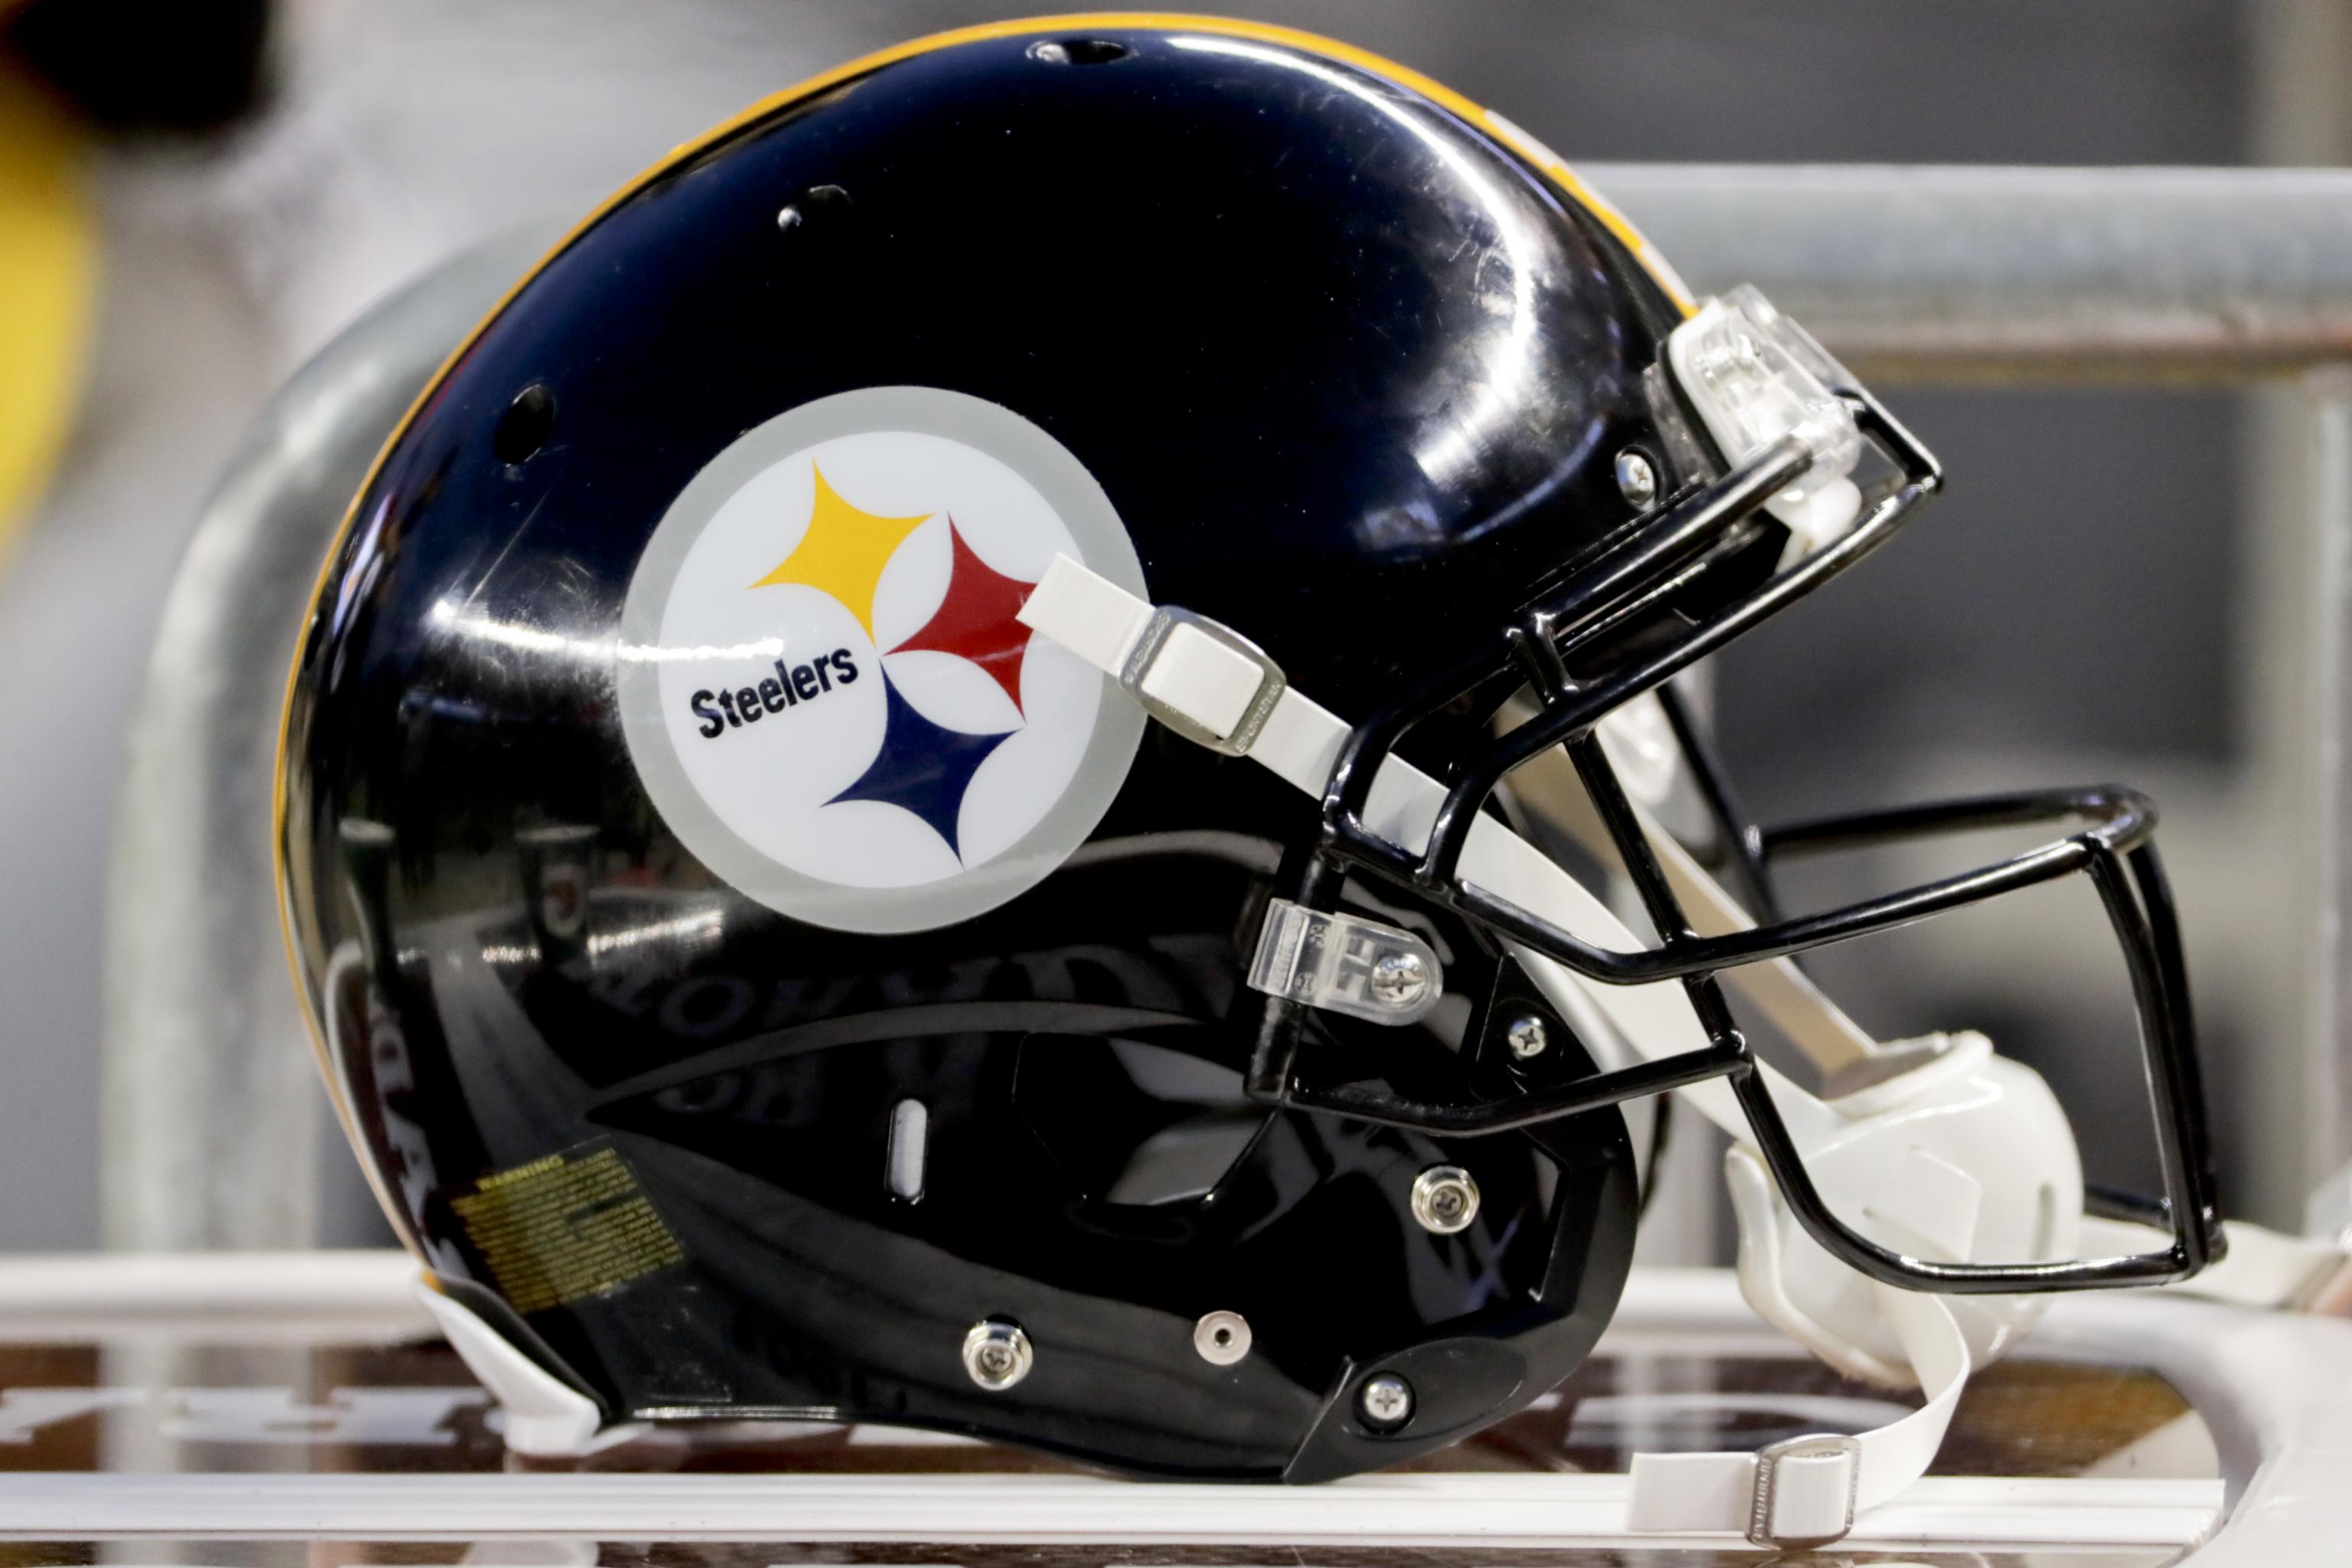 Steelers 2019 NFL Draft Rumors: PIT Looking to Trade Up in 1st